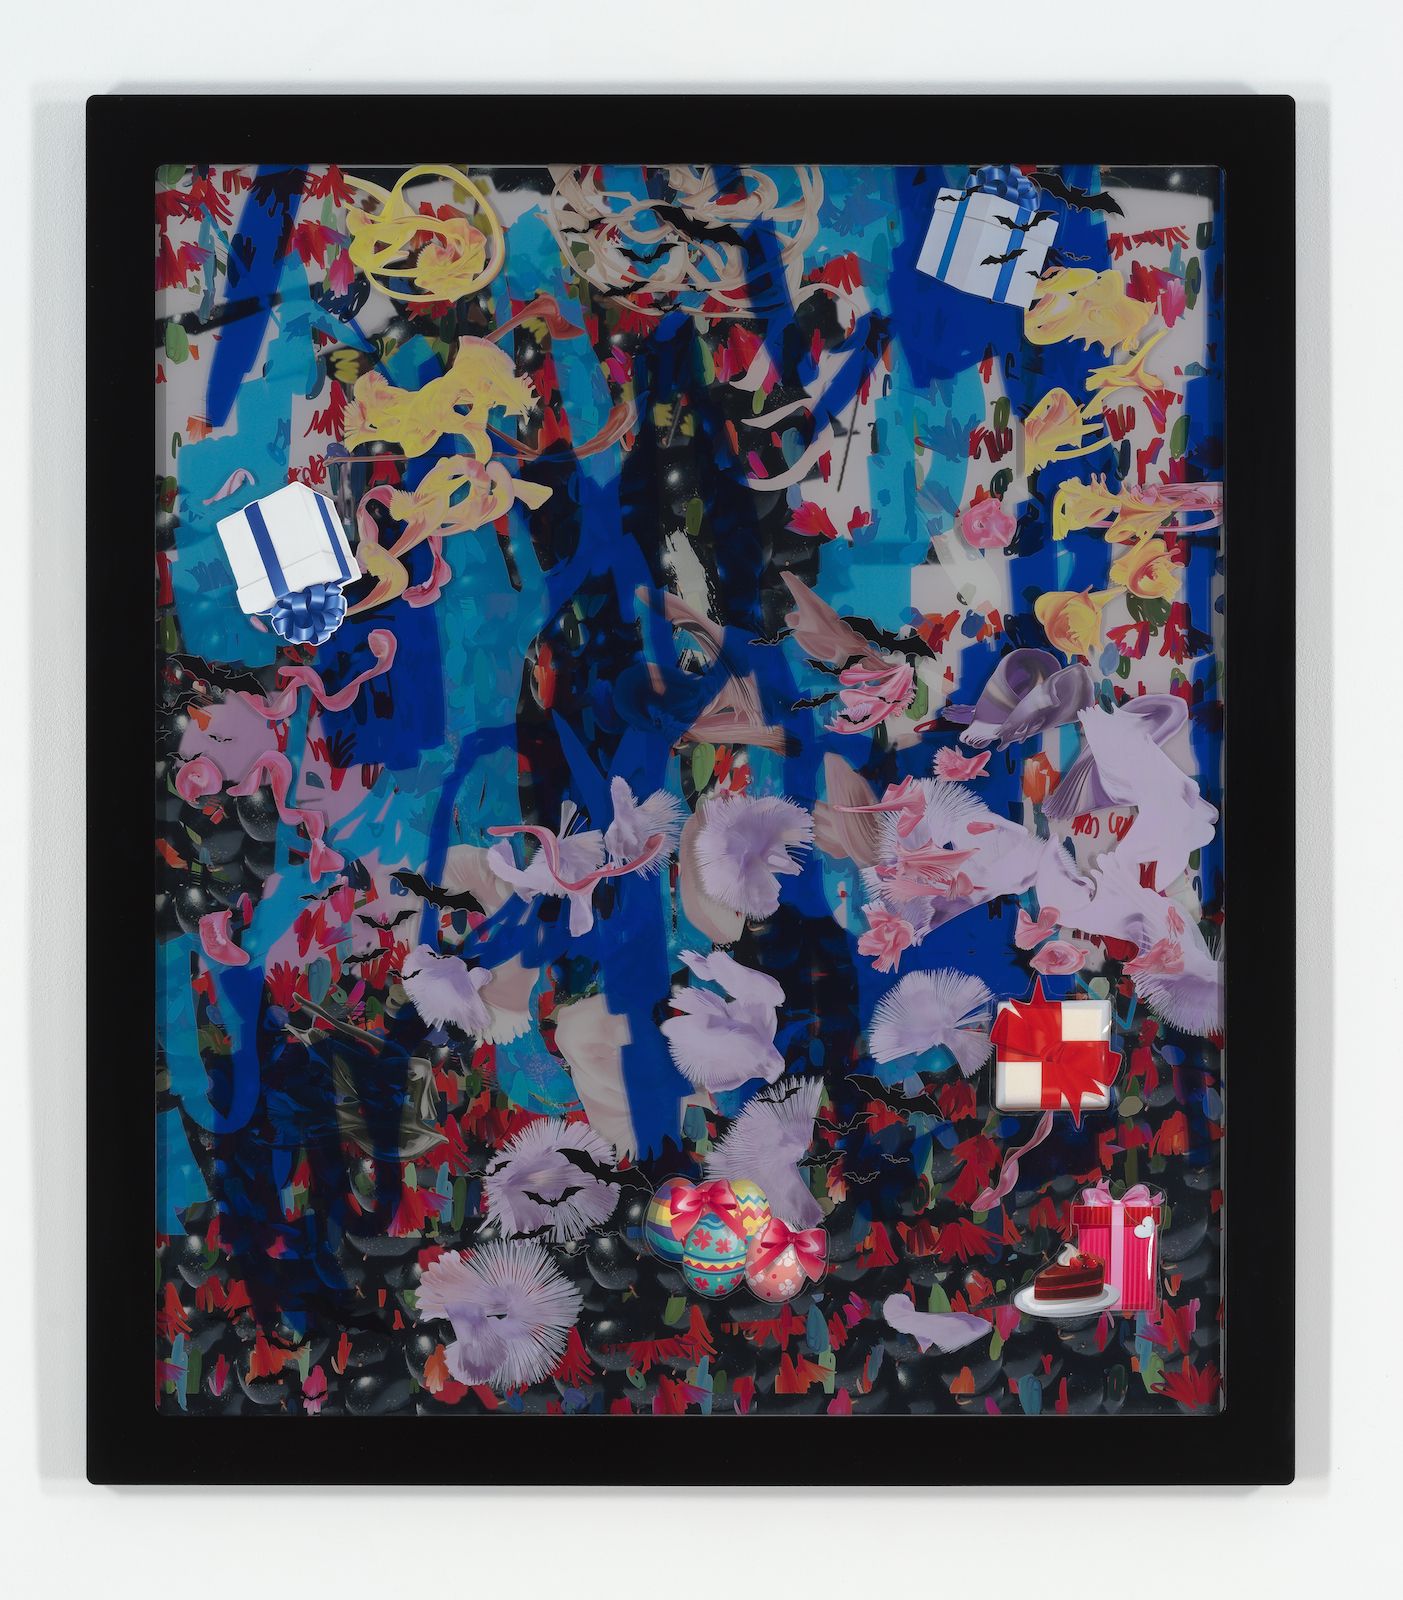 Petra Cortright, Buffy keepers+kick.rom, 2015, digital painting, duraflex, UV print, stickers, mounted on acrylic, 54 1⁄2 × 47 1⁄2 × 1 1⁄4 in.